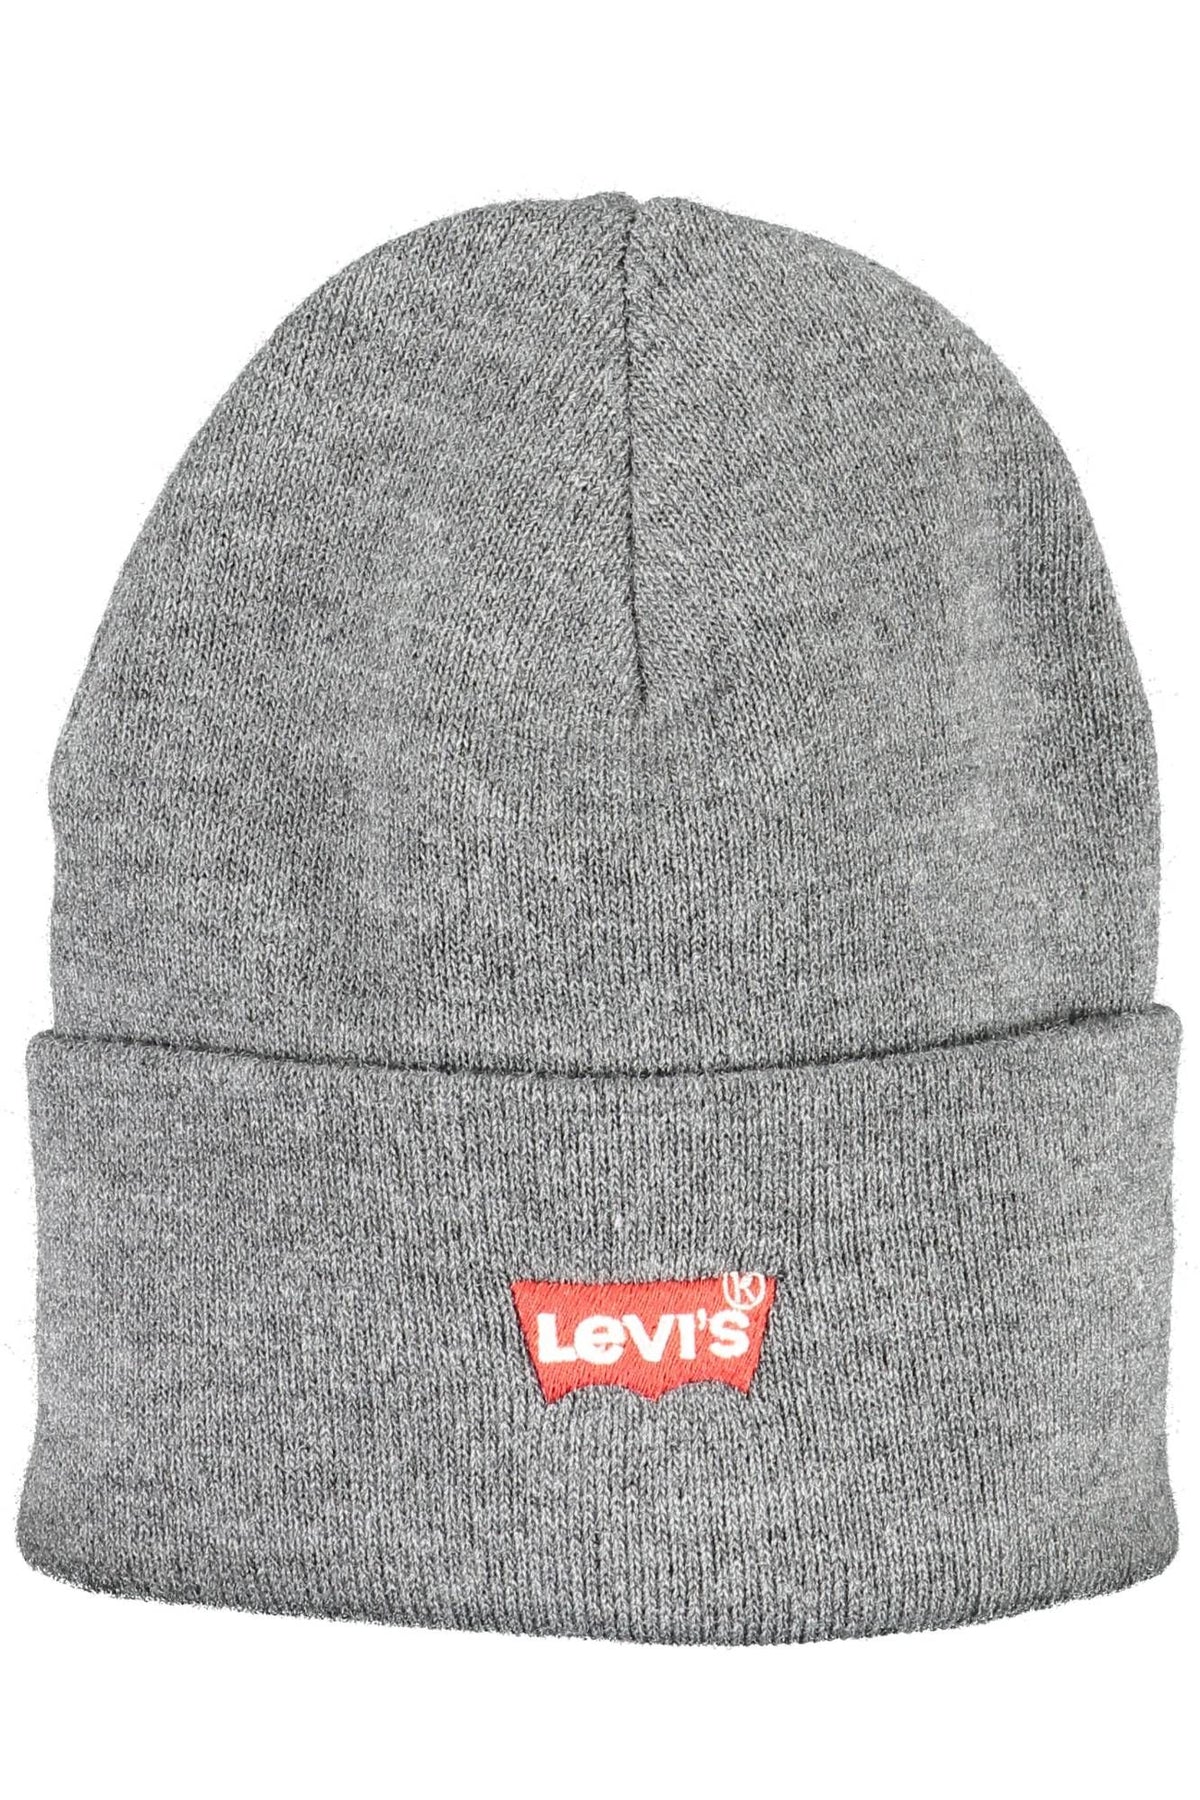 Levi's Chic Embroidered Logo Cap in Gray